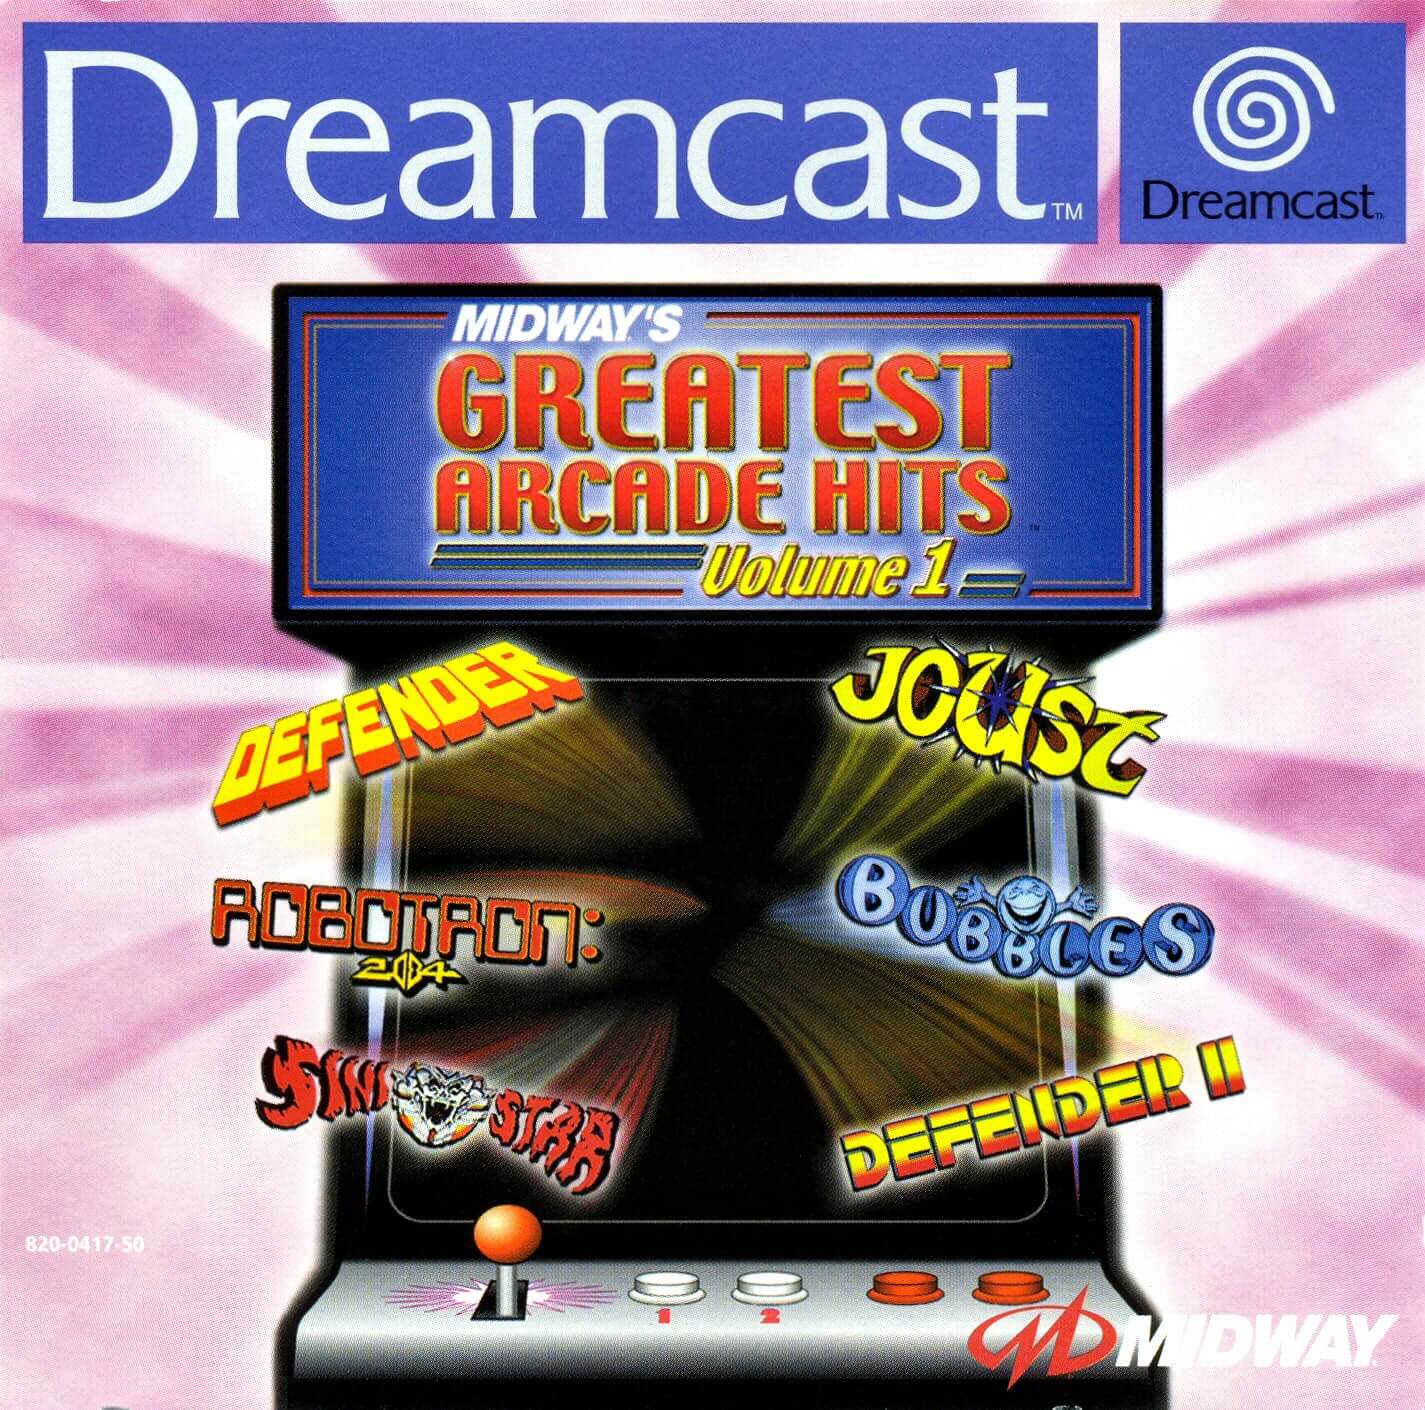 Midway’s Greatest Arcade Hits Volume 1